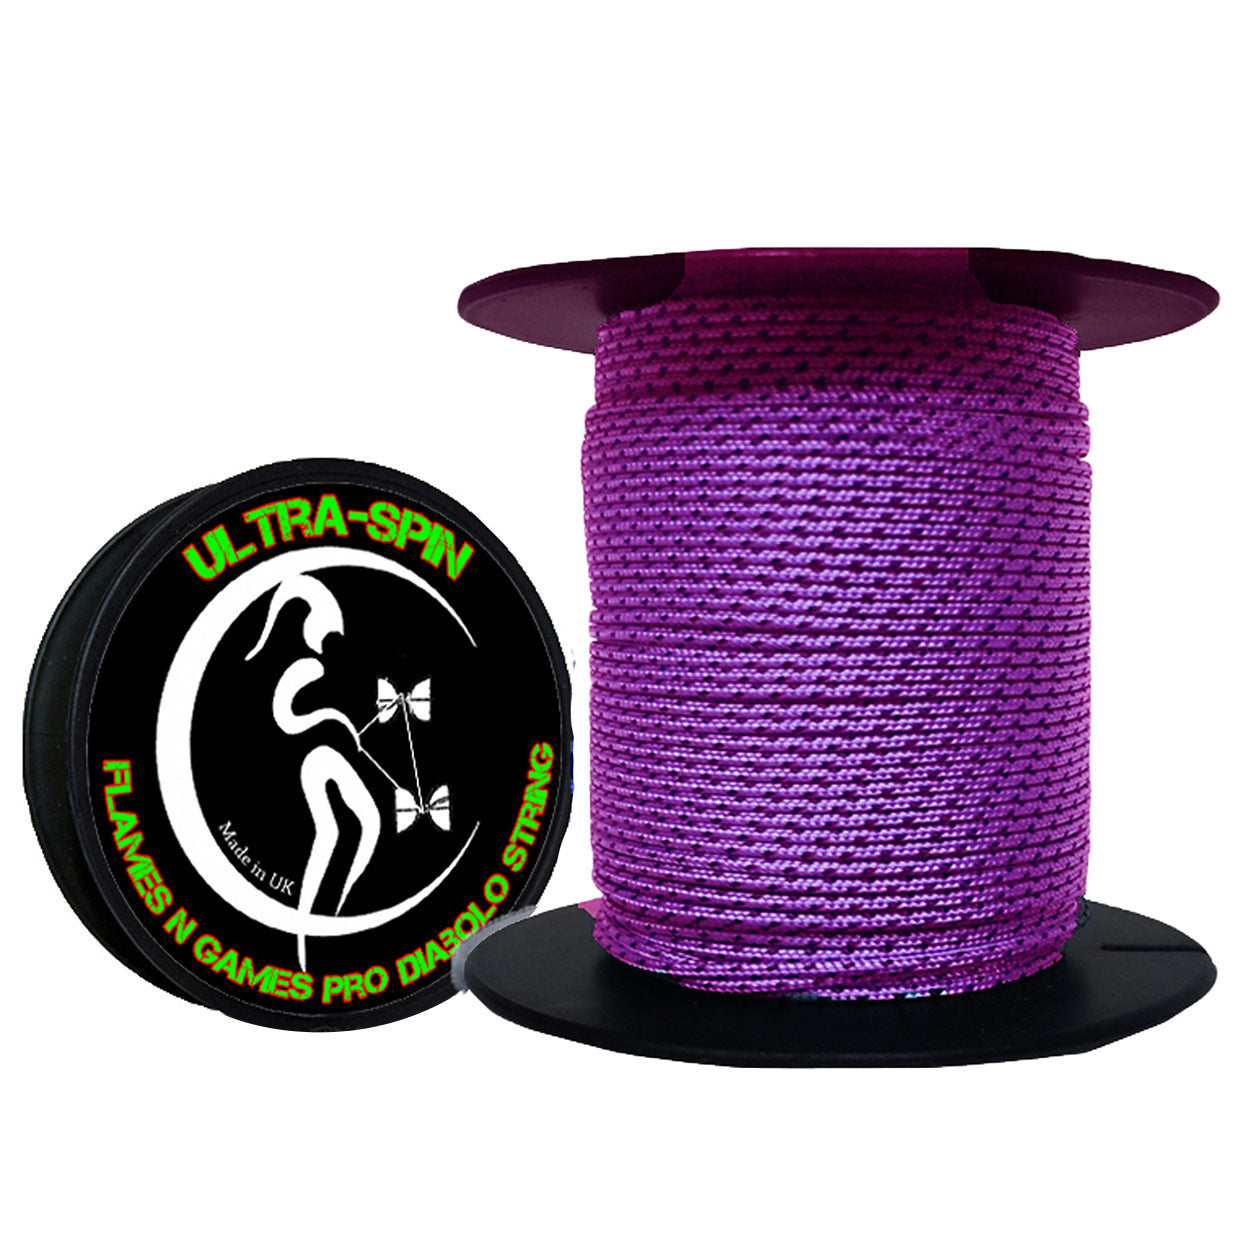 Flames N' Games ULTRA-SPIN Pro Diabolo String 25meter Reel Purple and Black colour